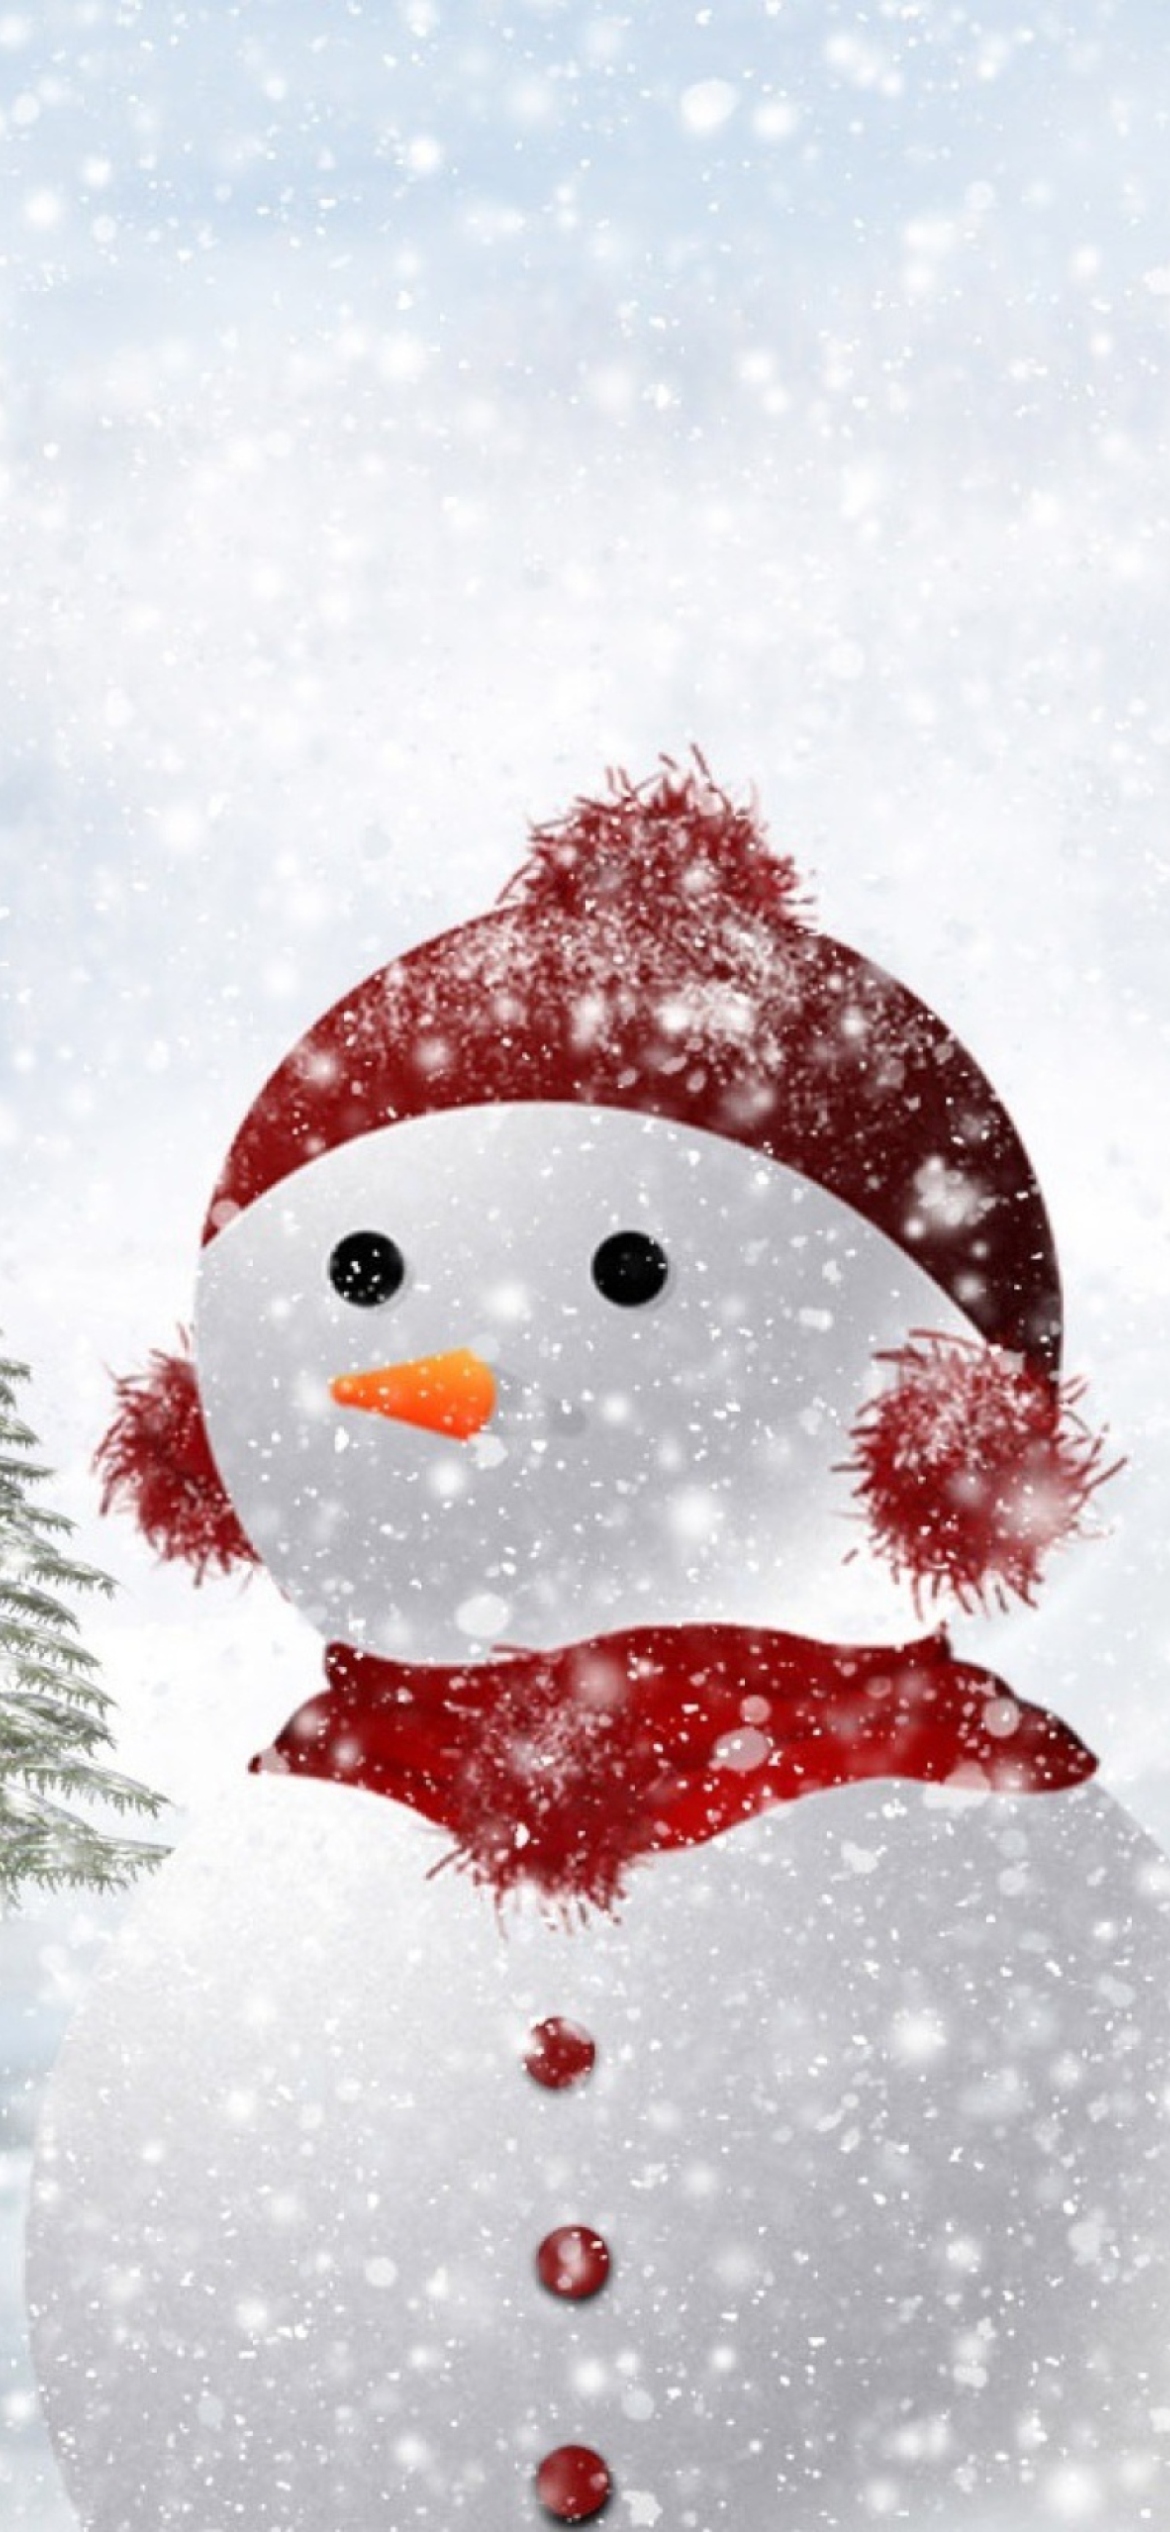 Download wallpaper 840x1336 snowman cute snowfall christmas iphone 5  iphone 5s iphone 5c ipod touch 840x1336 hd background 15801